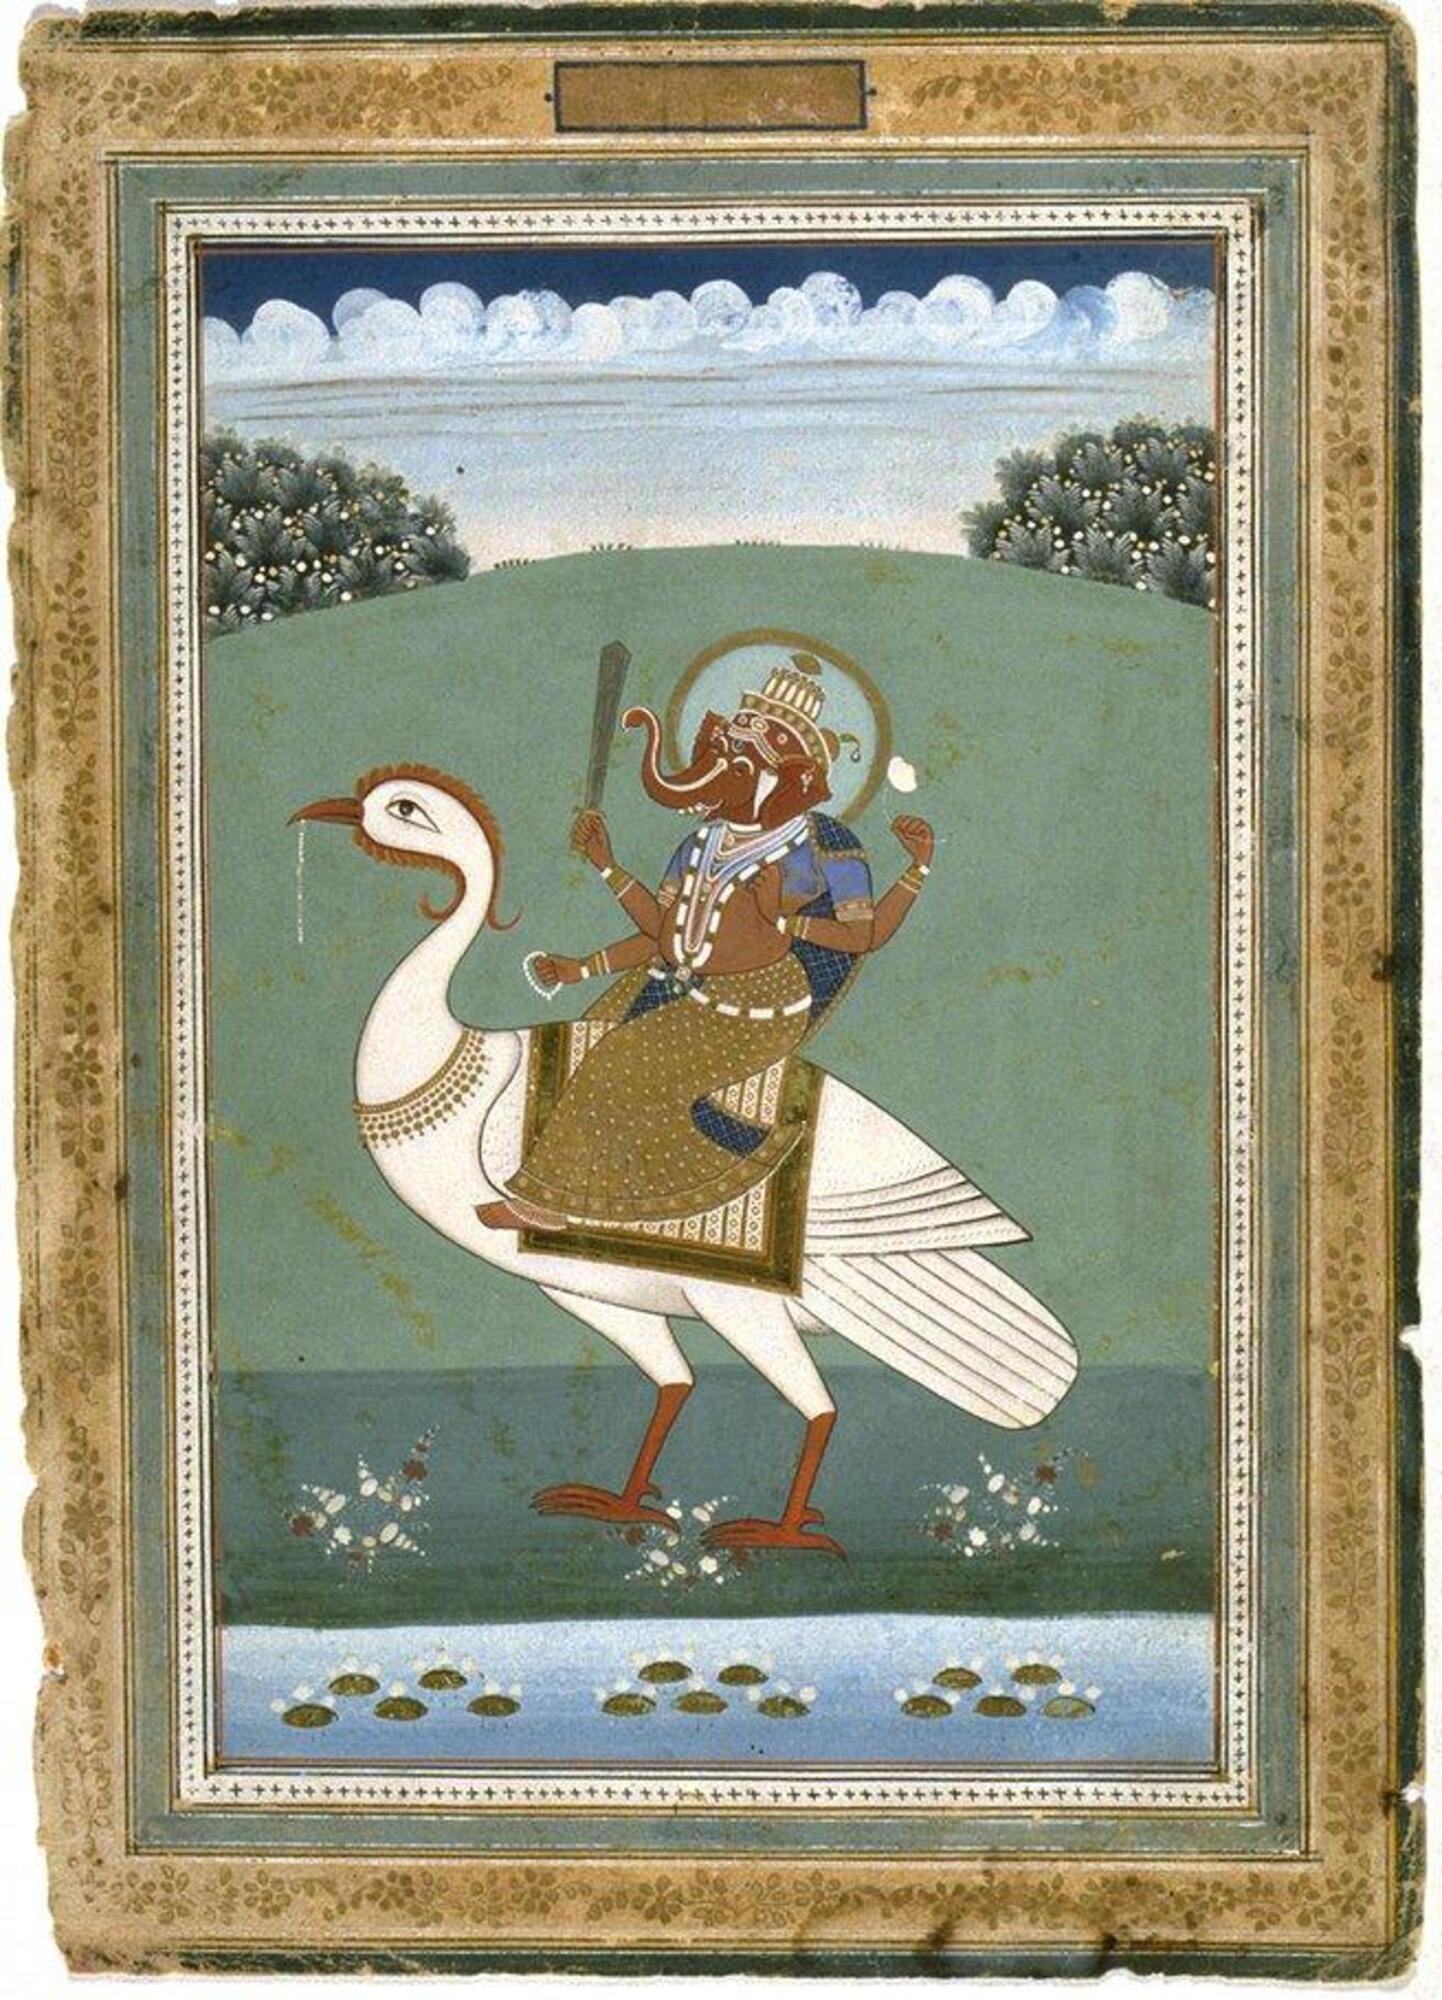 The Hindu God Ganesha sits atop a large white bird (a stork?). He holds the following objects in three of his four hands: a sword, lotus flower, and prayer beads. The stork also has a string of beads hanging from its beak. The landscape is plain and green, and a stream of water flows below.